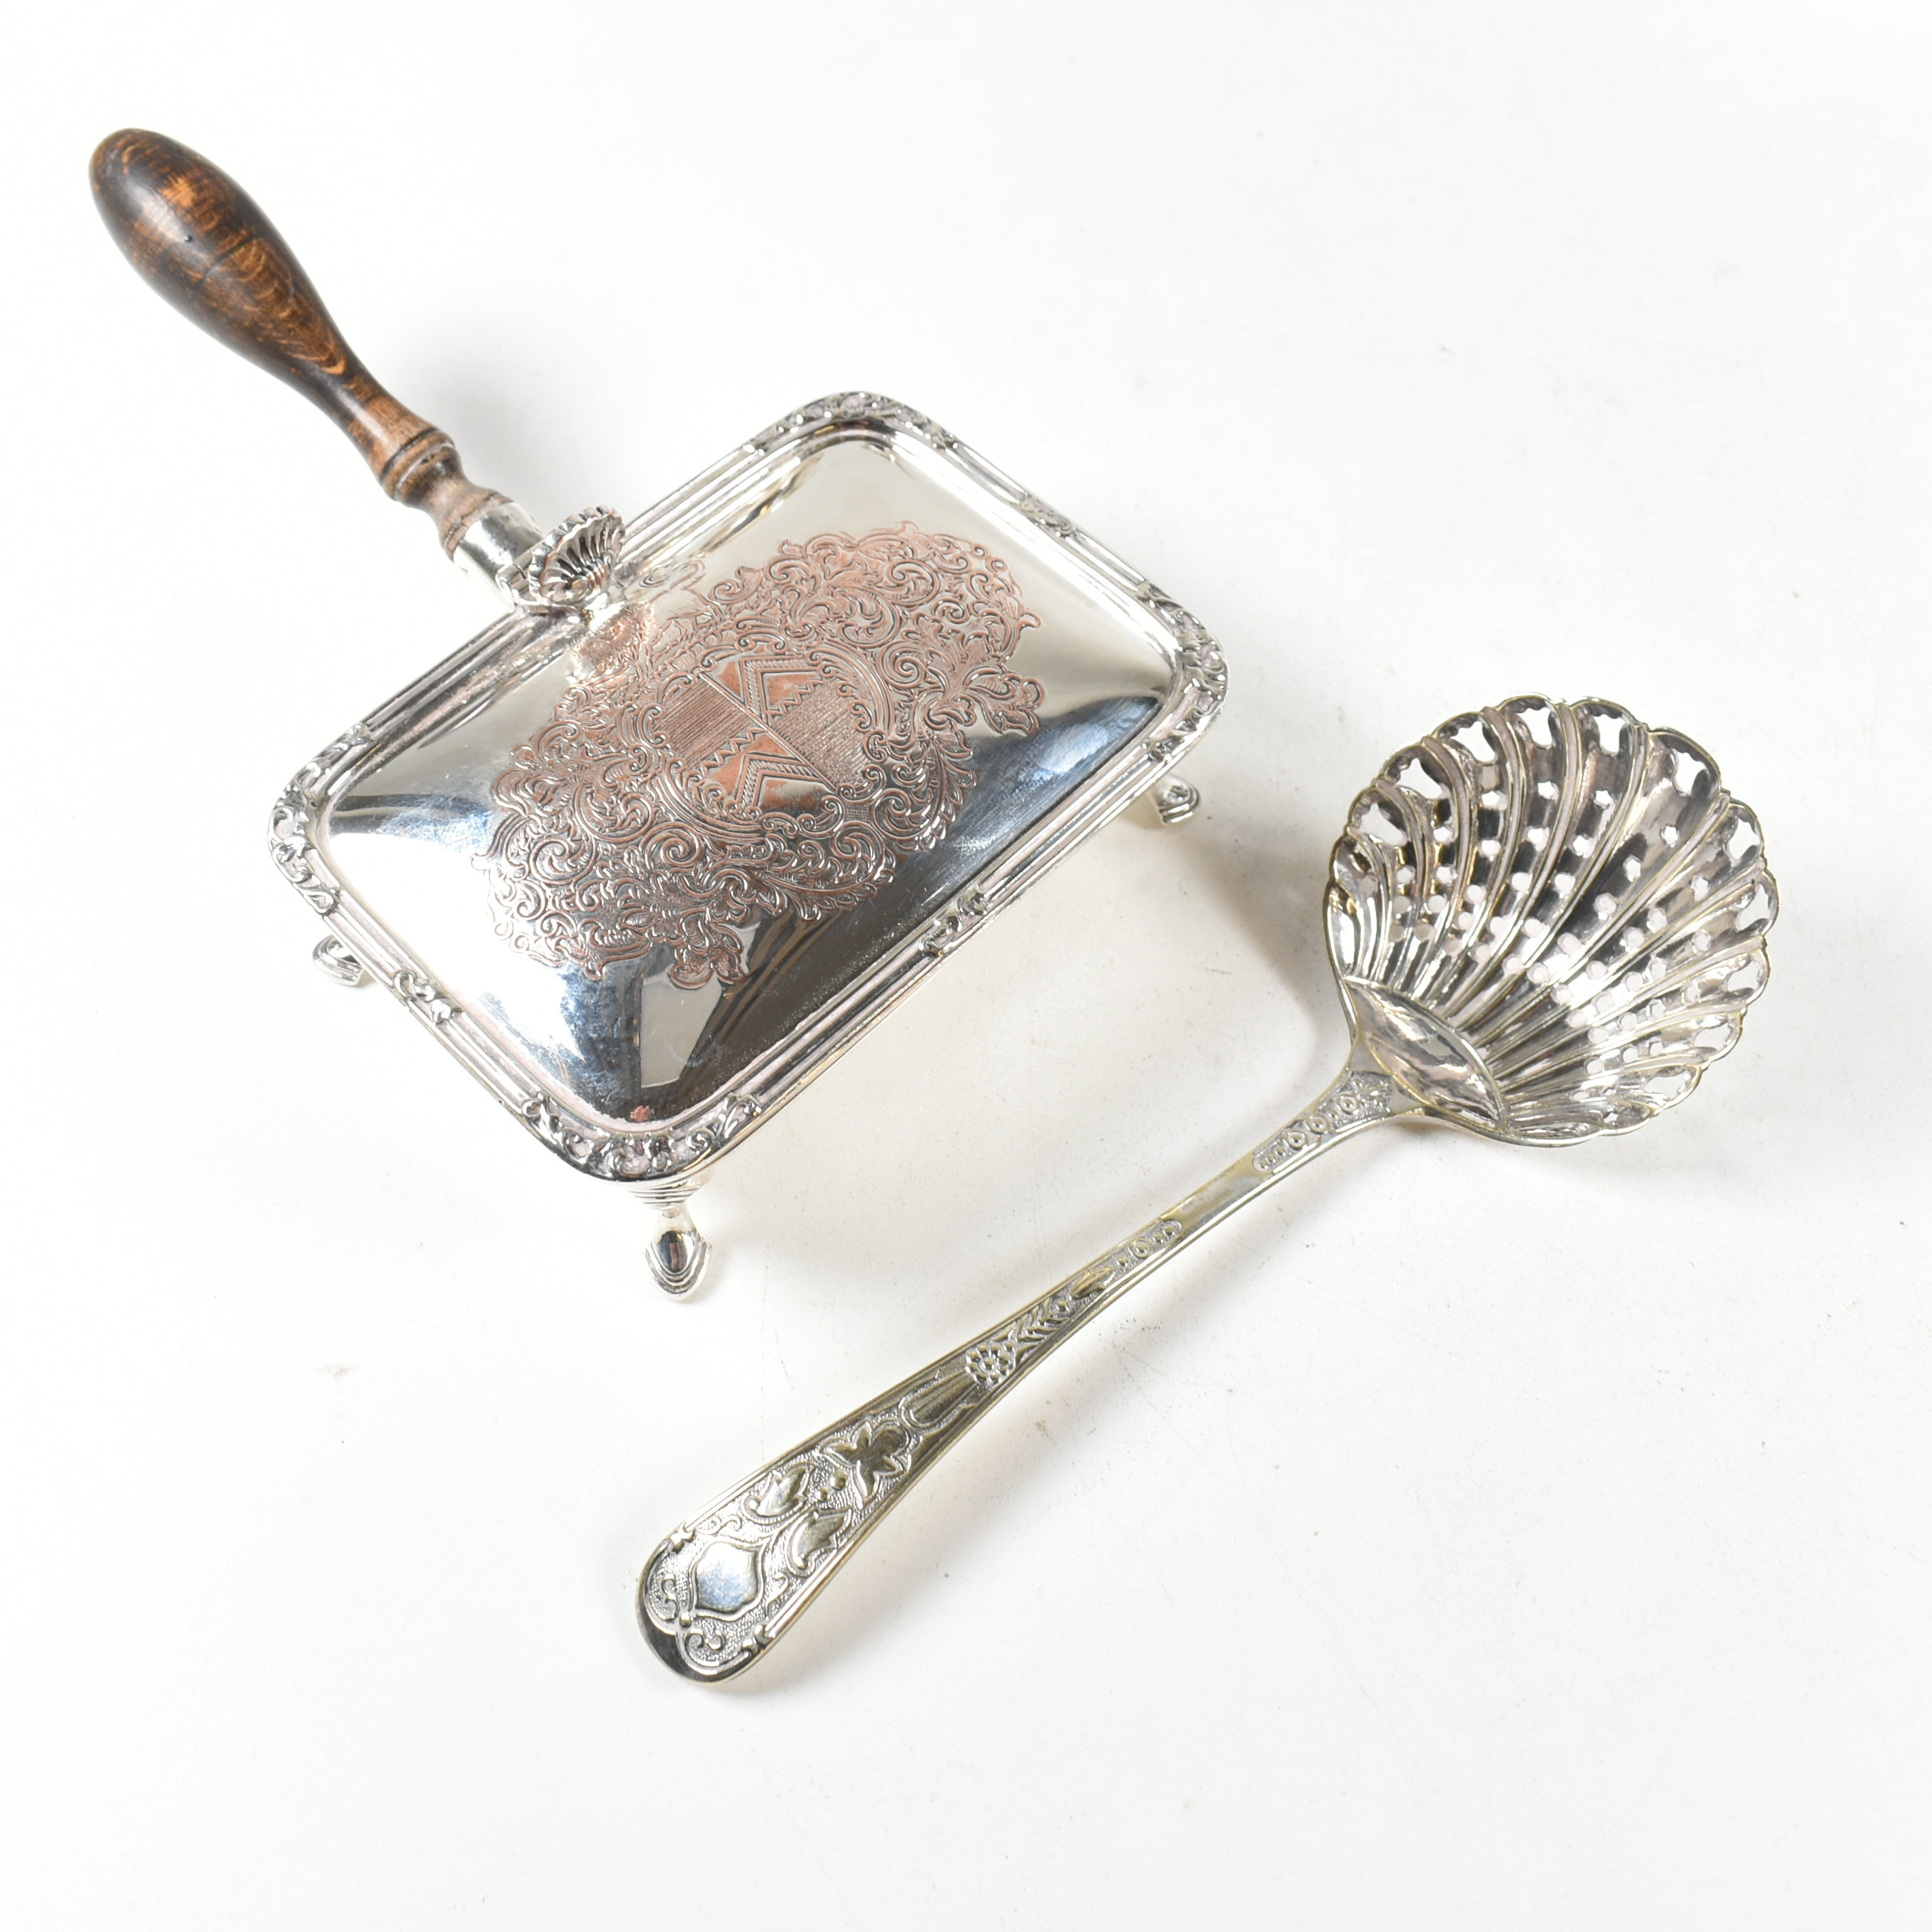 COLLECTION OF SILVER PLATED ITEMS - SUGAR SIFTING SPOON, URN - Image 6 of 8